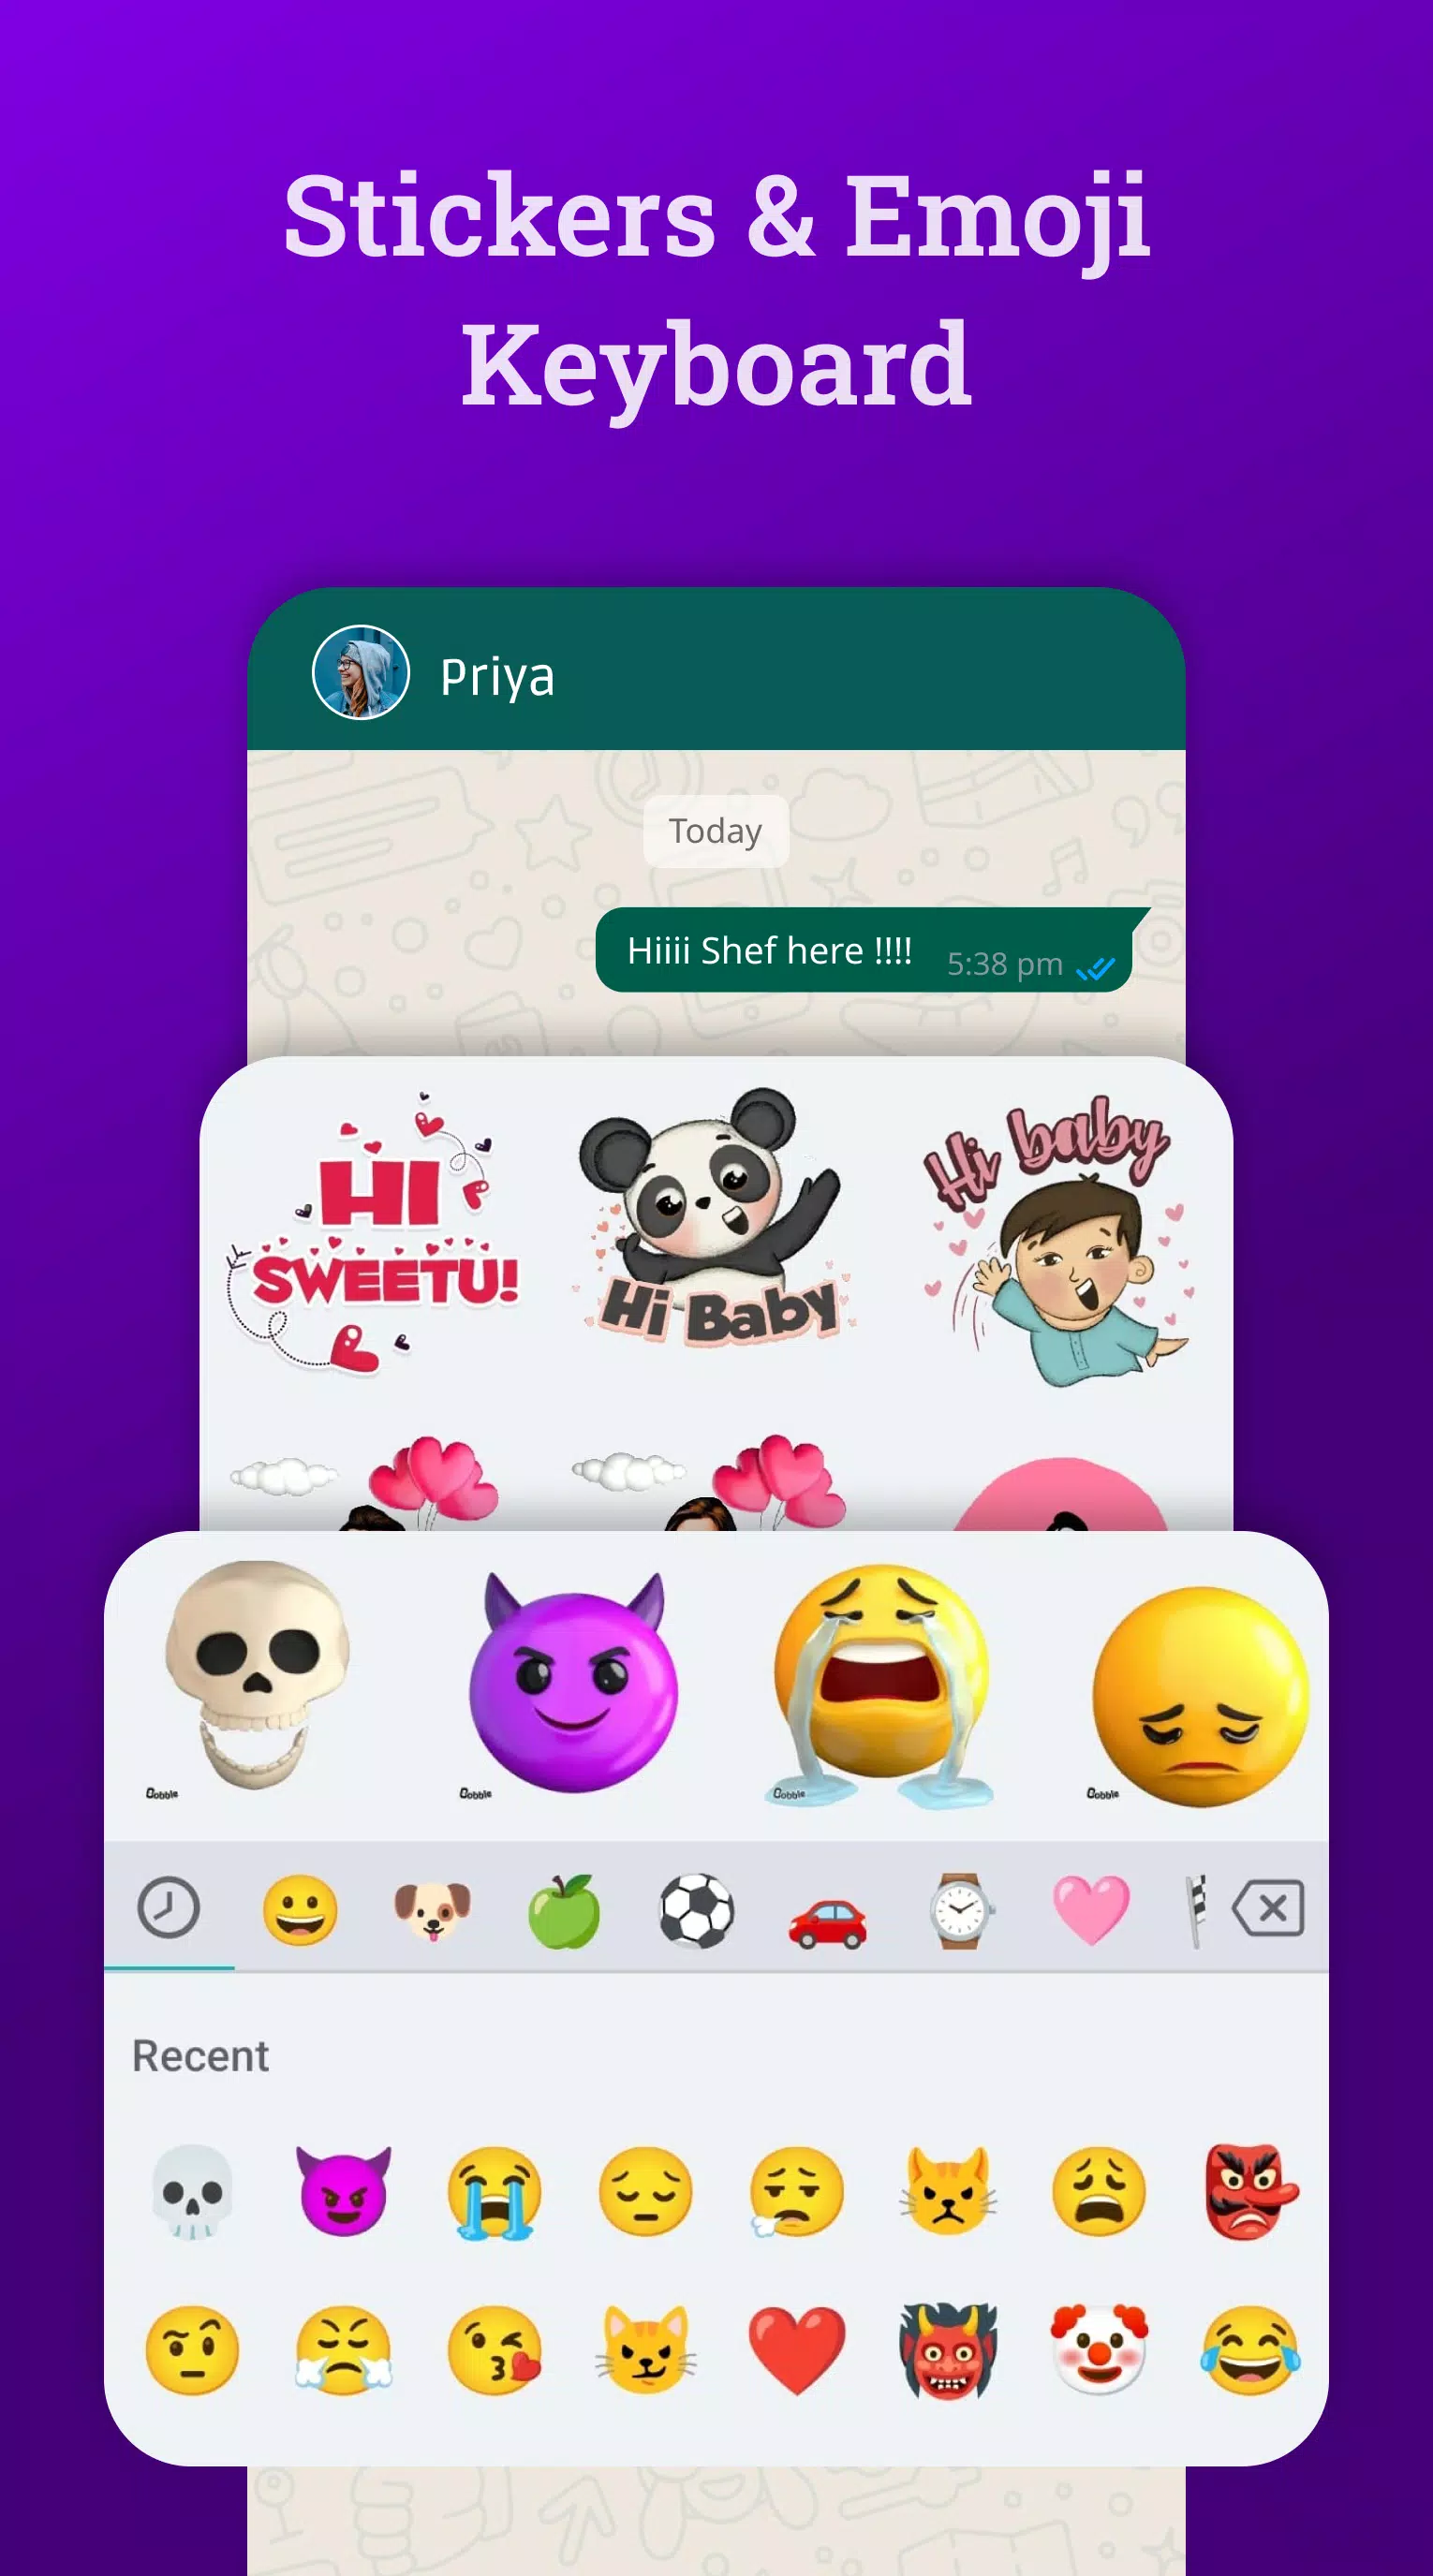 2023 Bobble Keyboard APK Download for Android APKfun com text a 